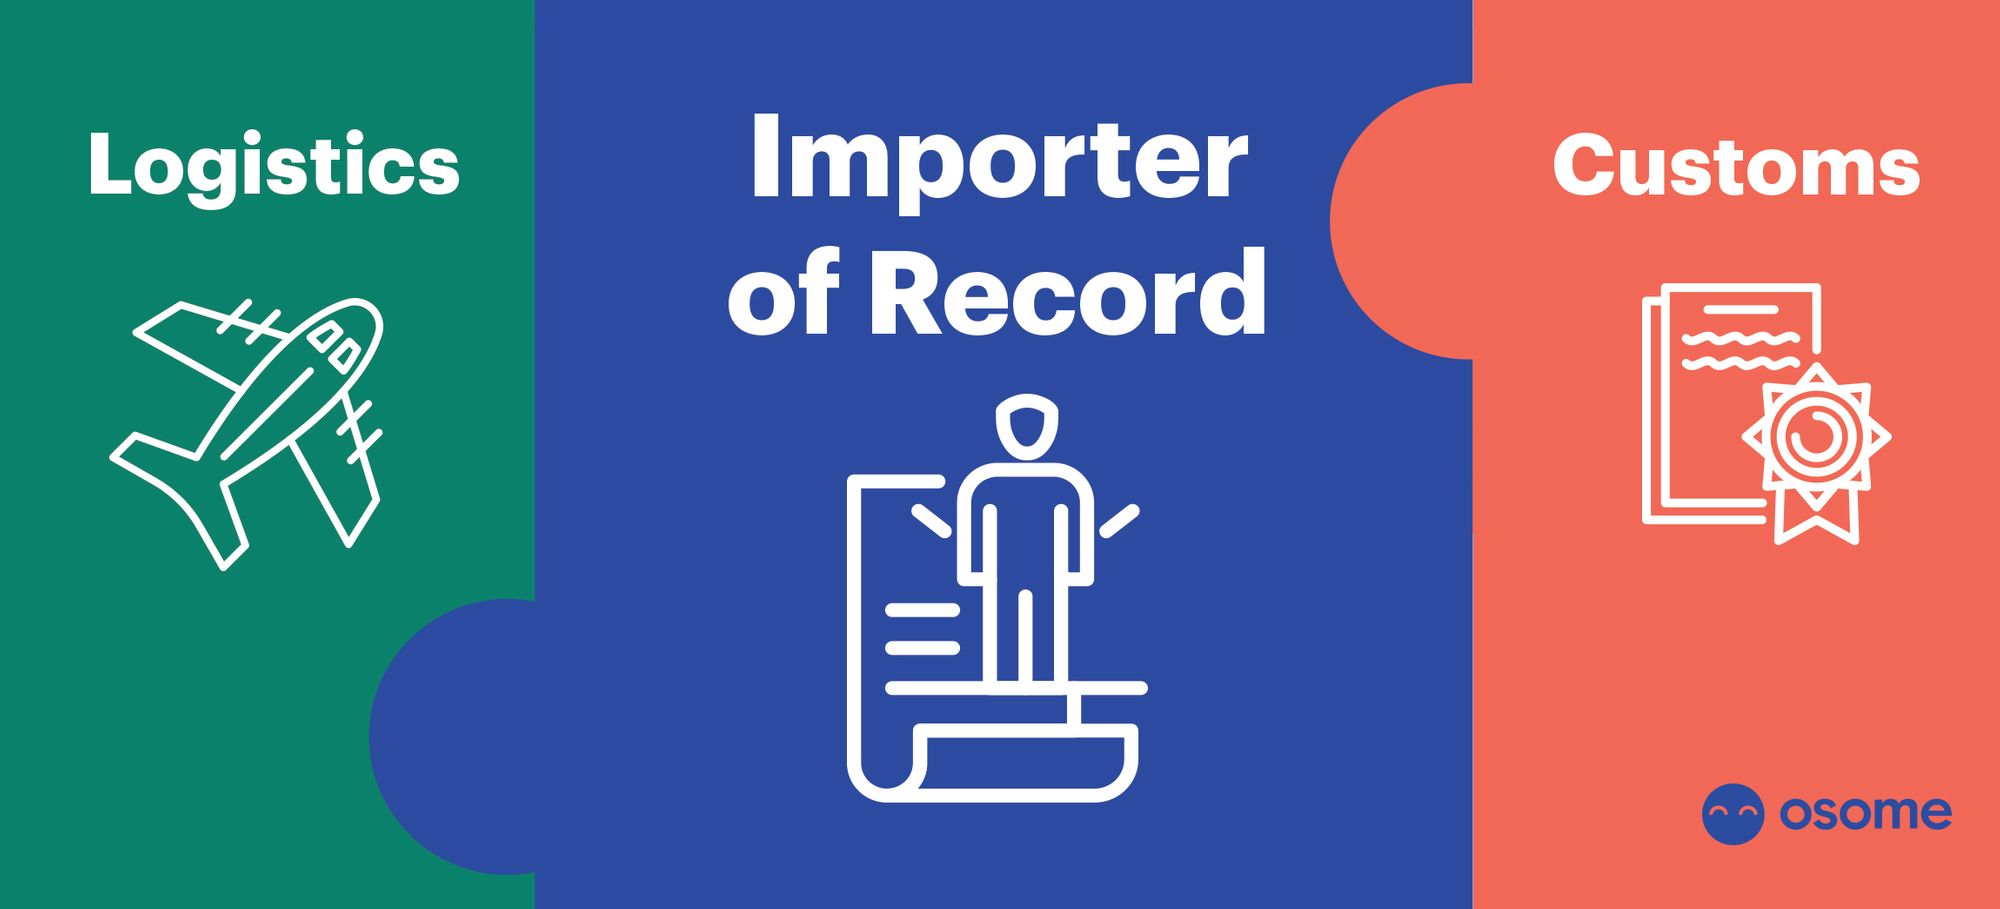 Identify the Importer of Record